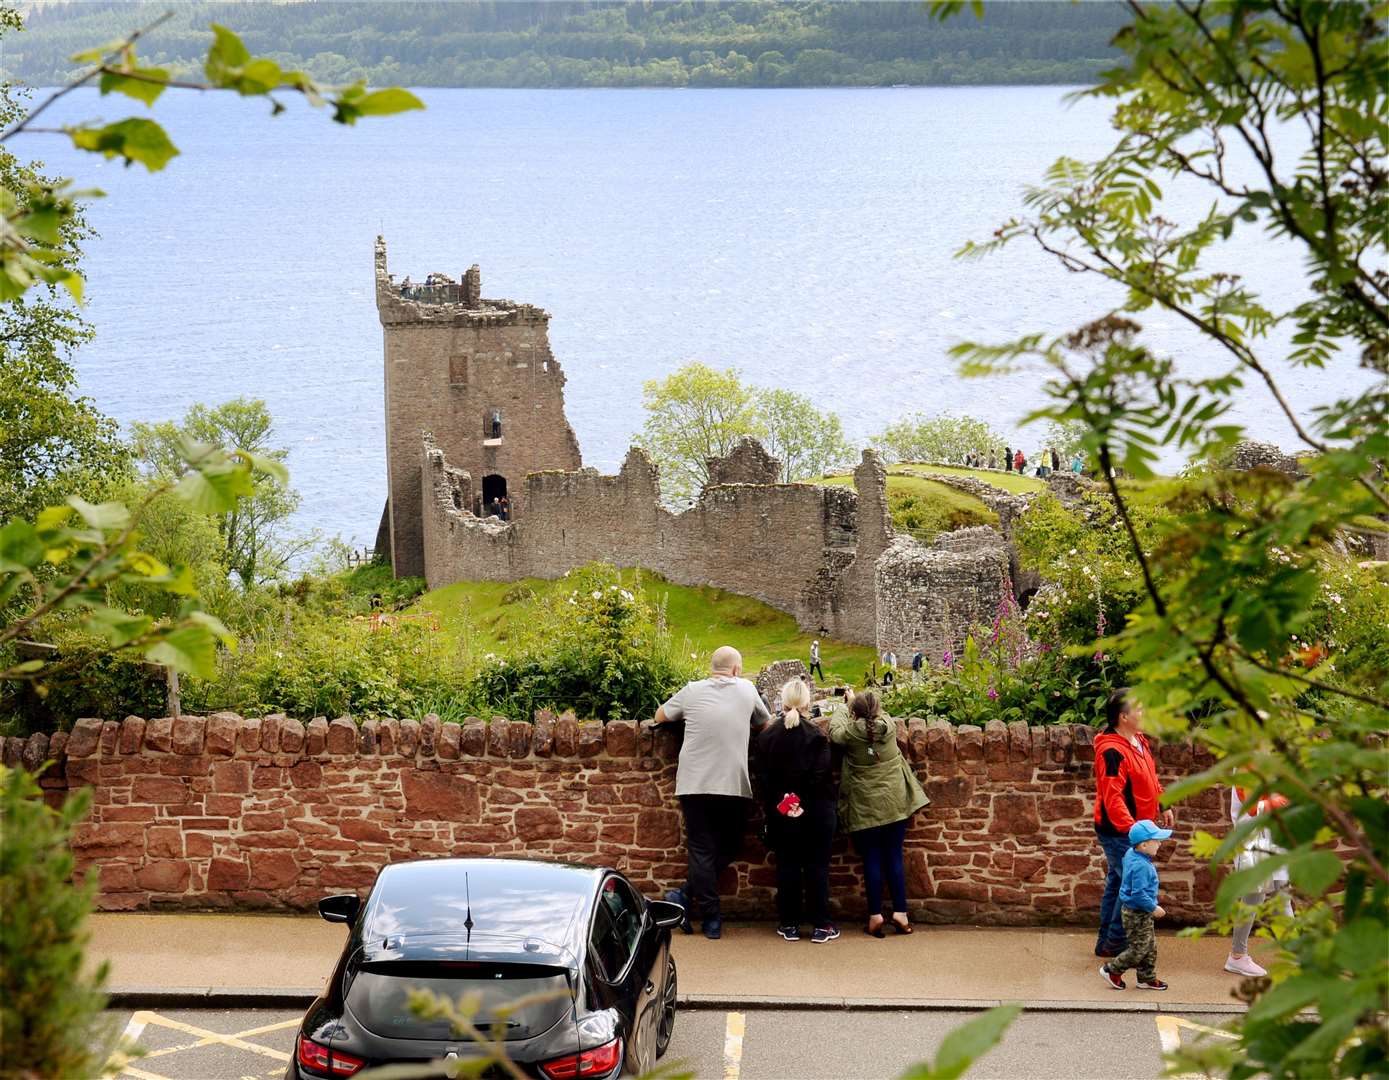 Visitors can start returning to Urquhart Castle from next month.